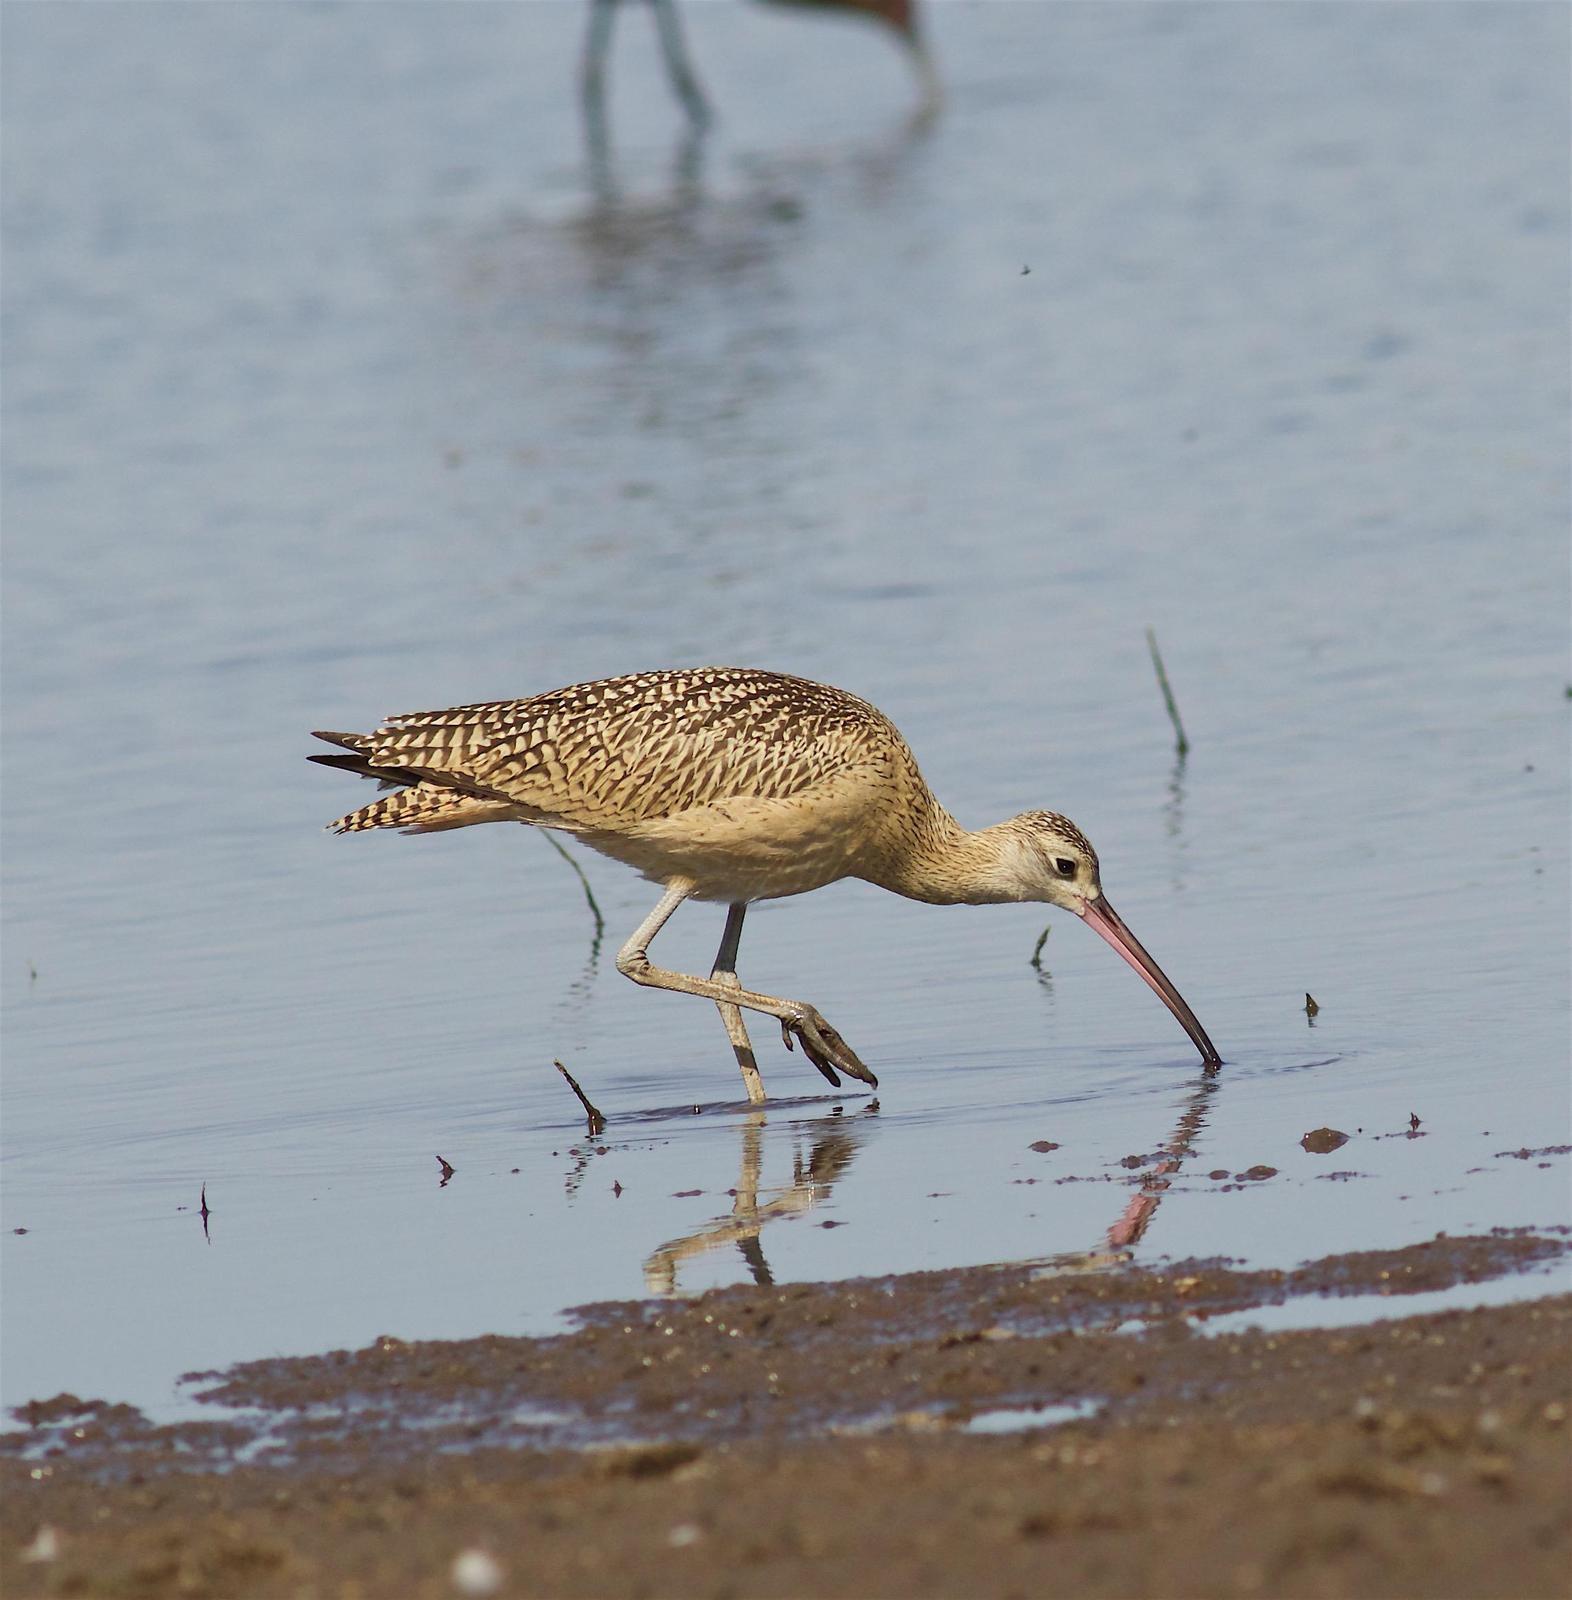 Long-billed Curlew Photo by Kathryn Keith